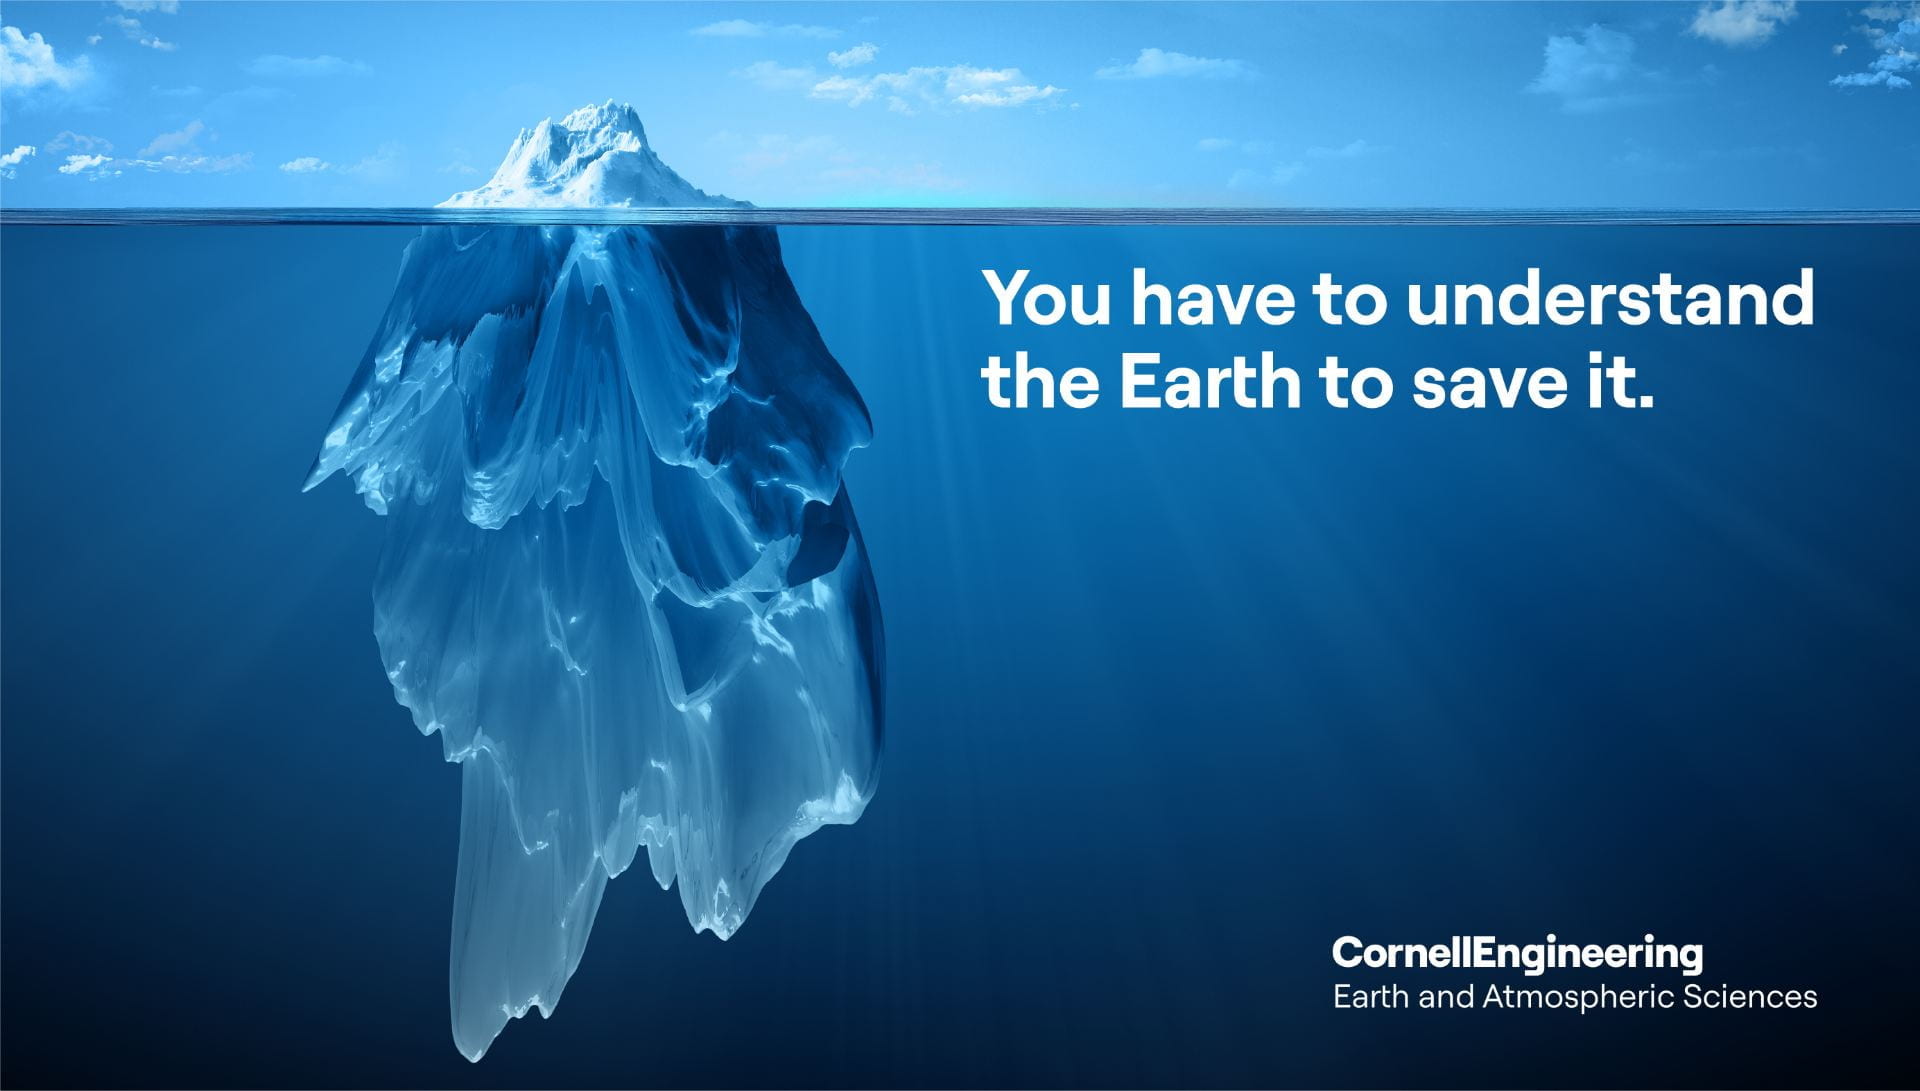 Large blue iceberg photographed both above and below the water line. Text on image says You have to understand the Earth to save it. 